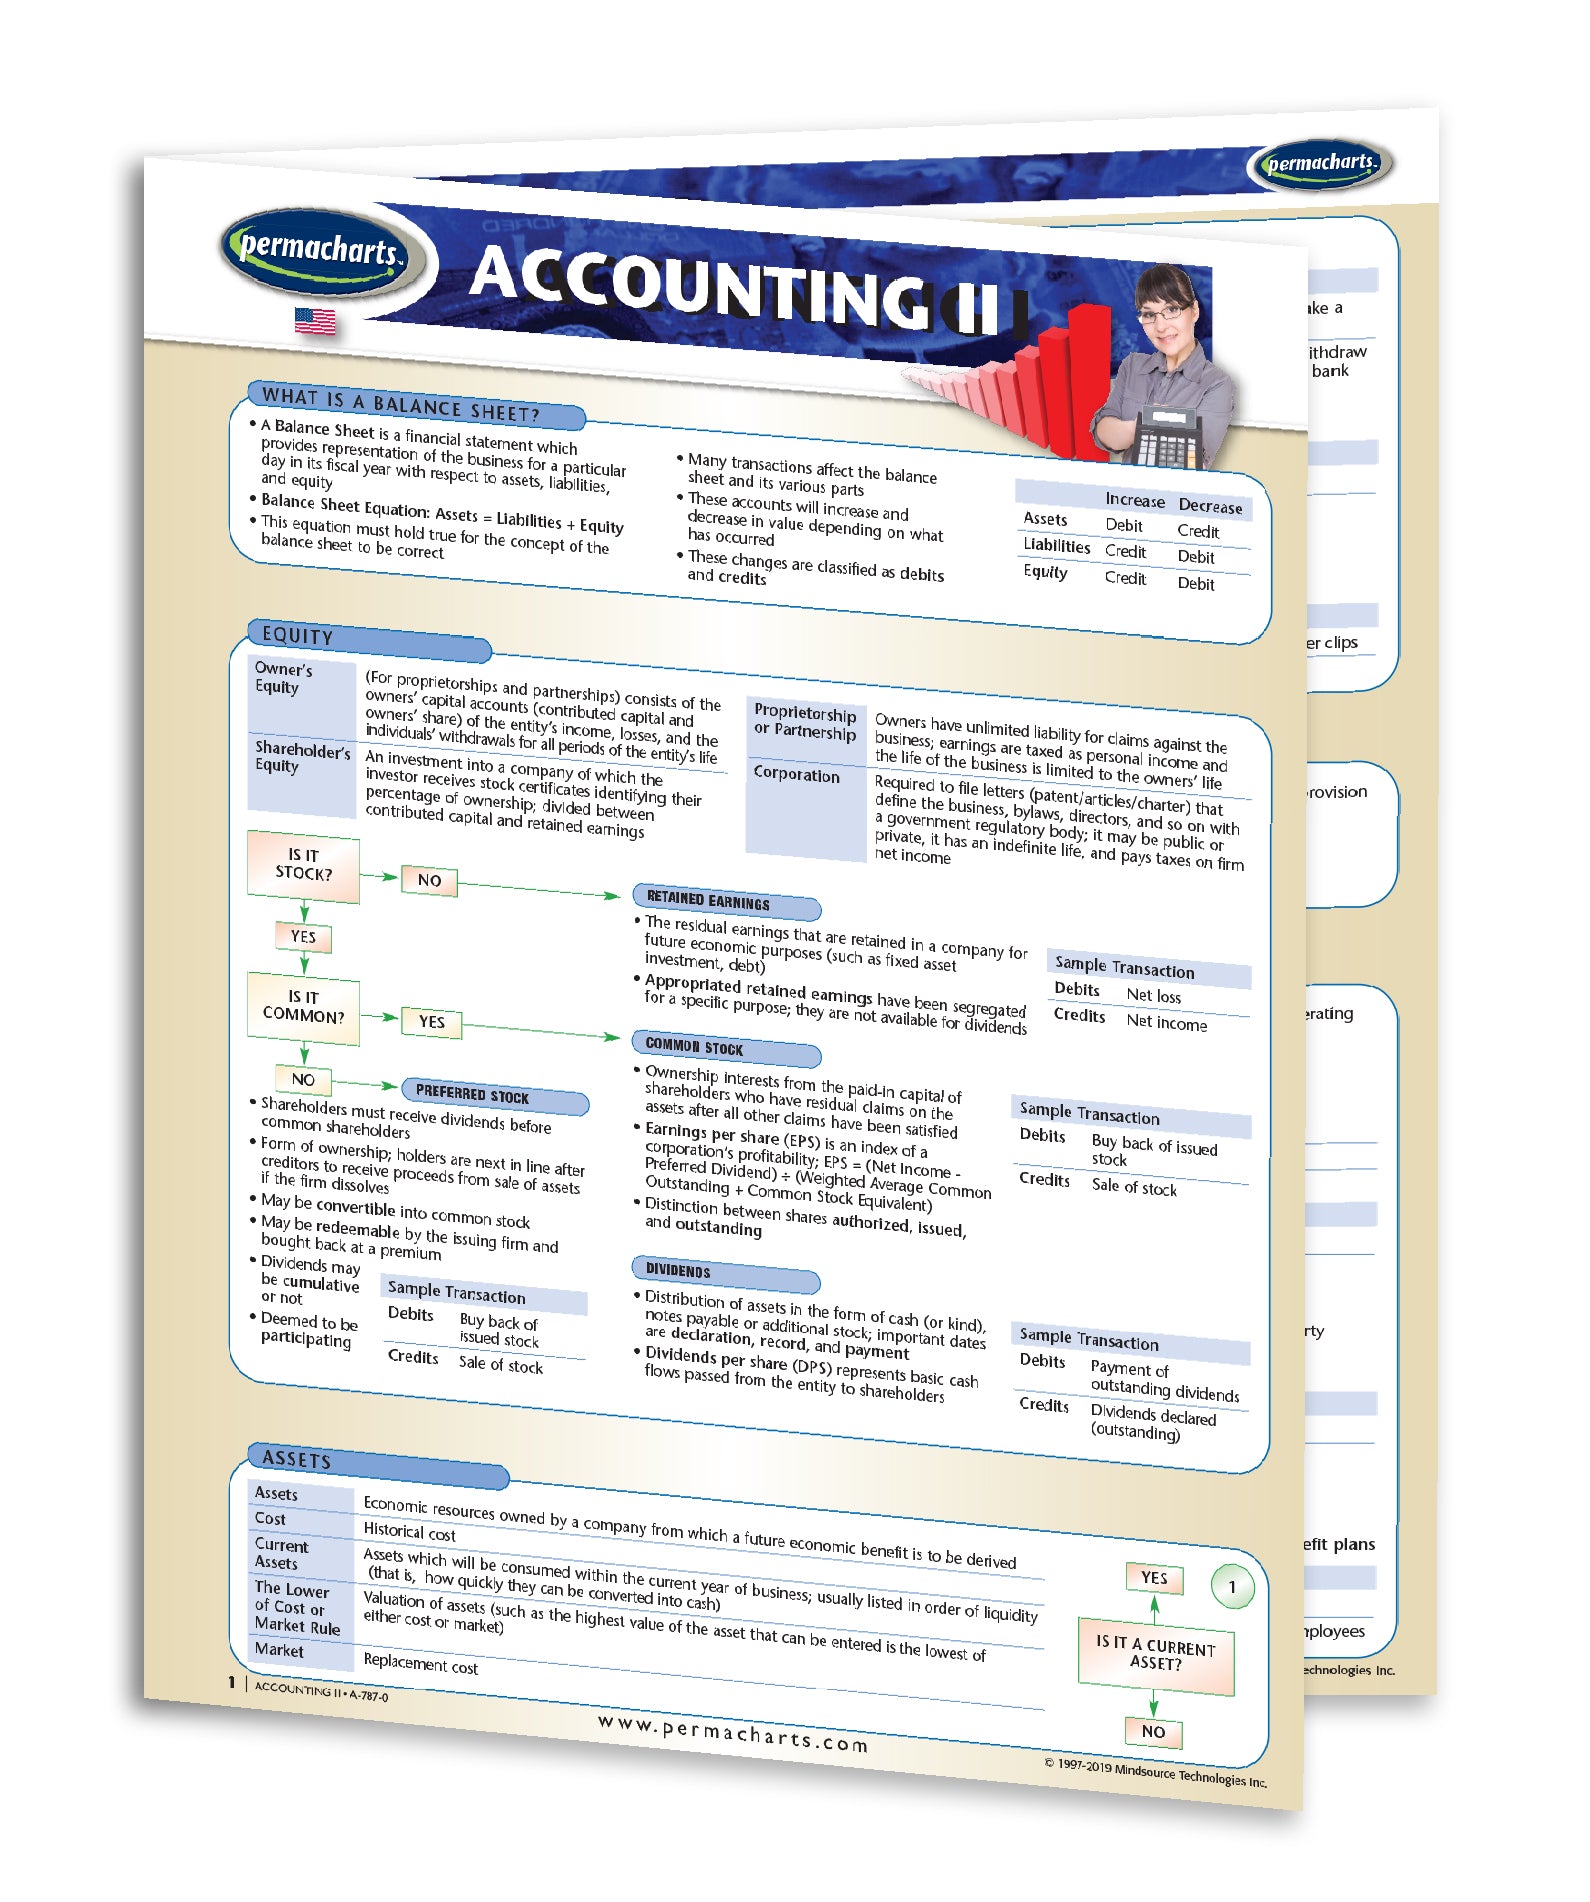 Intermediate Accounting 2: A Quickstudy Laminated Reference Guide (Other)